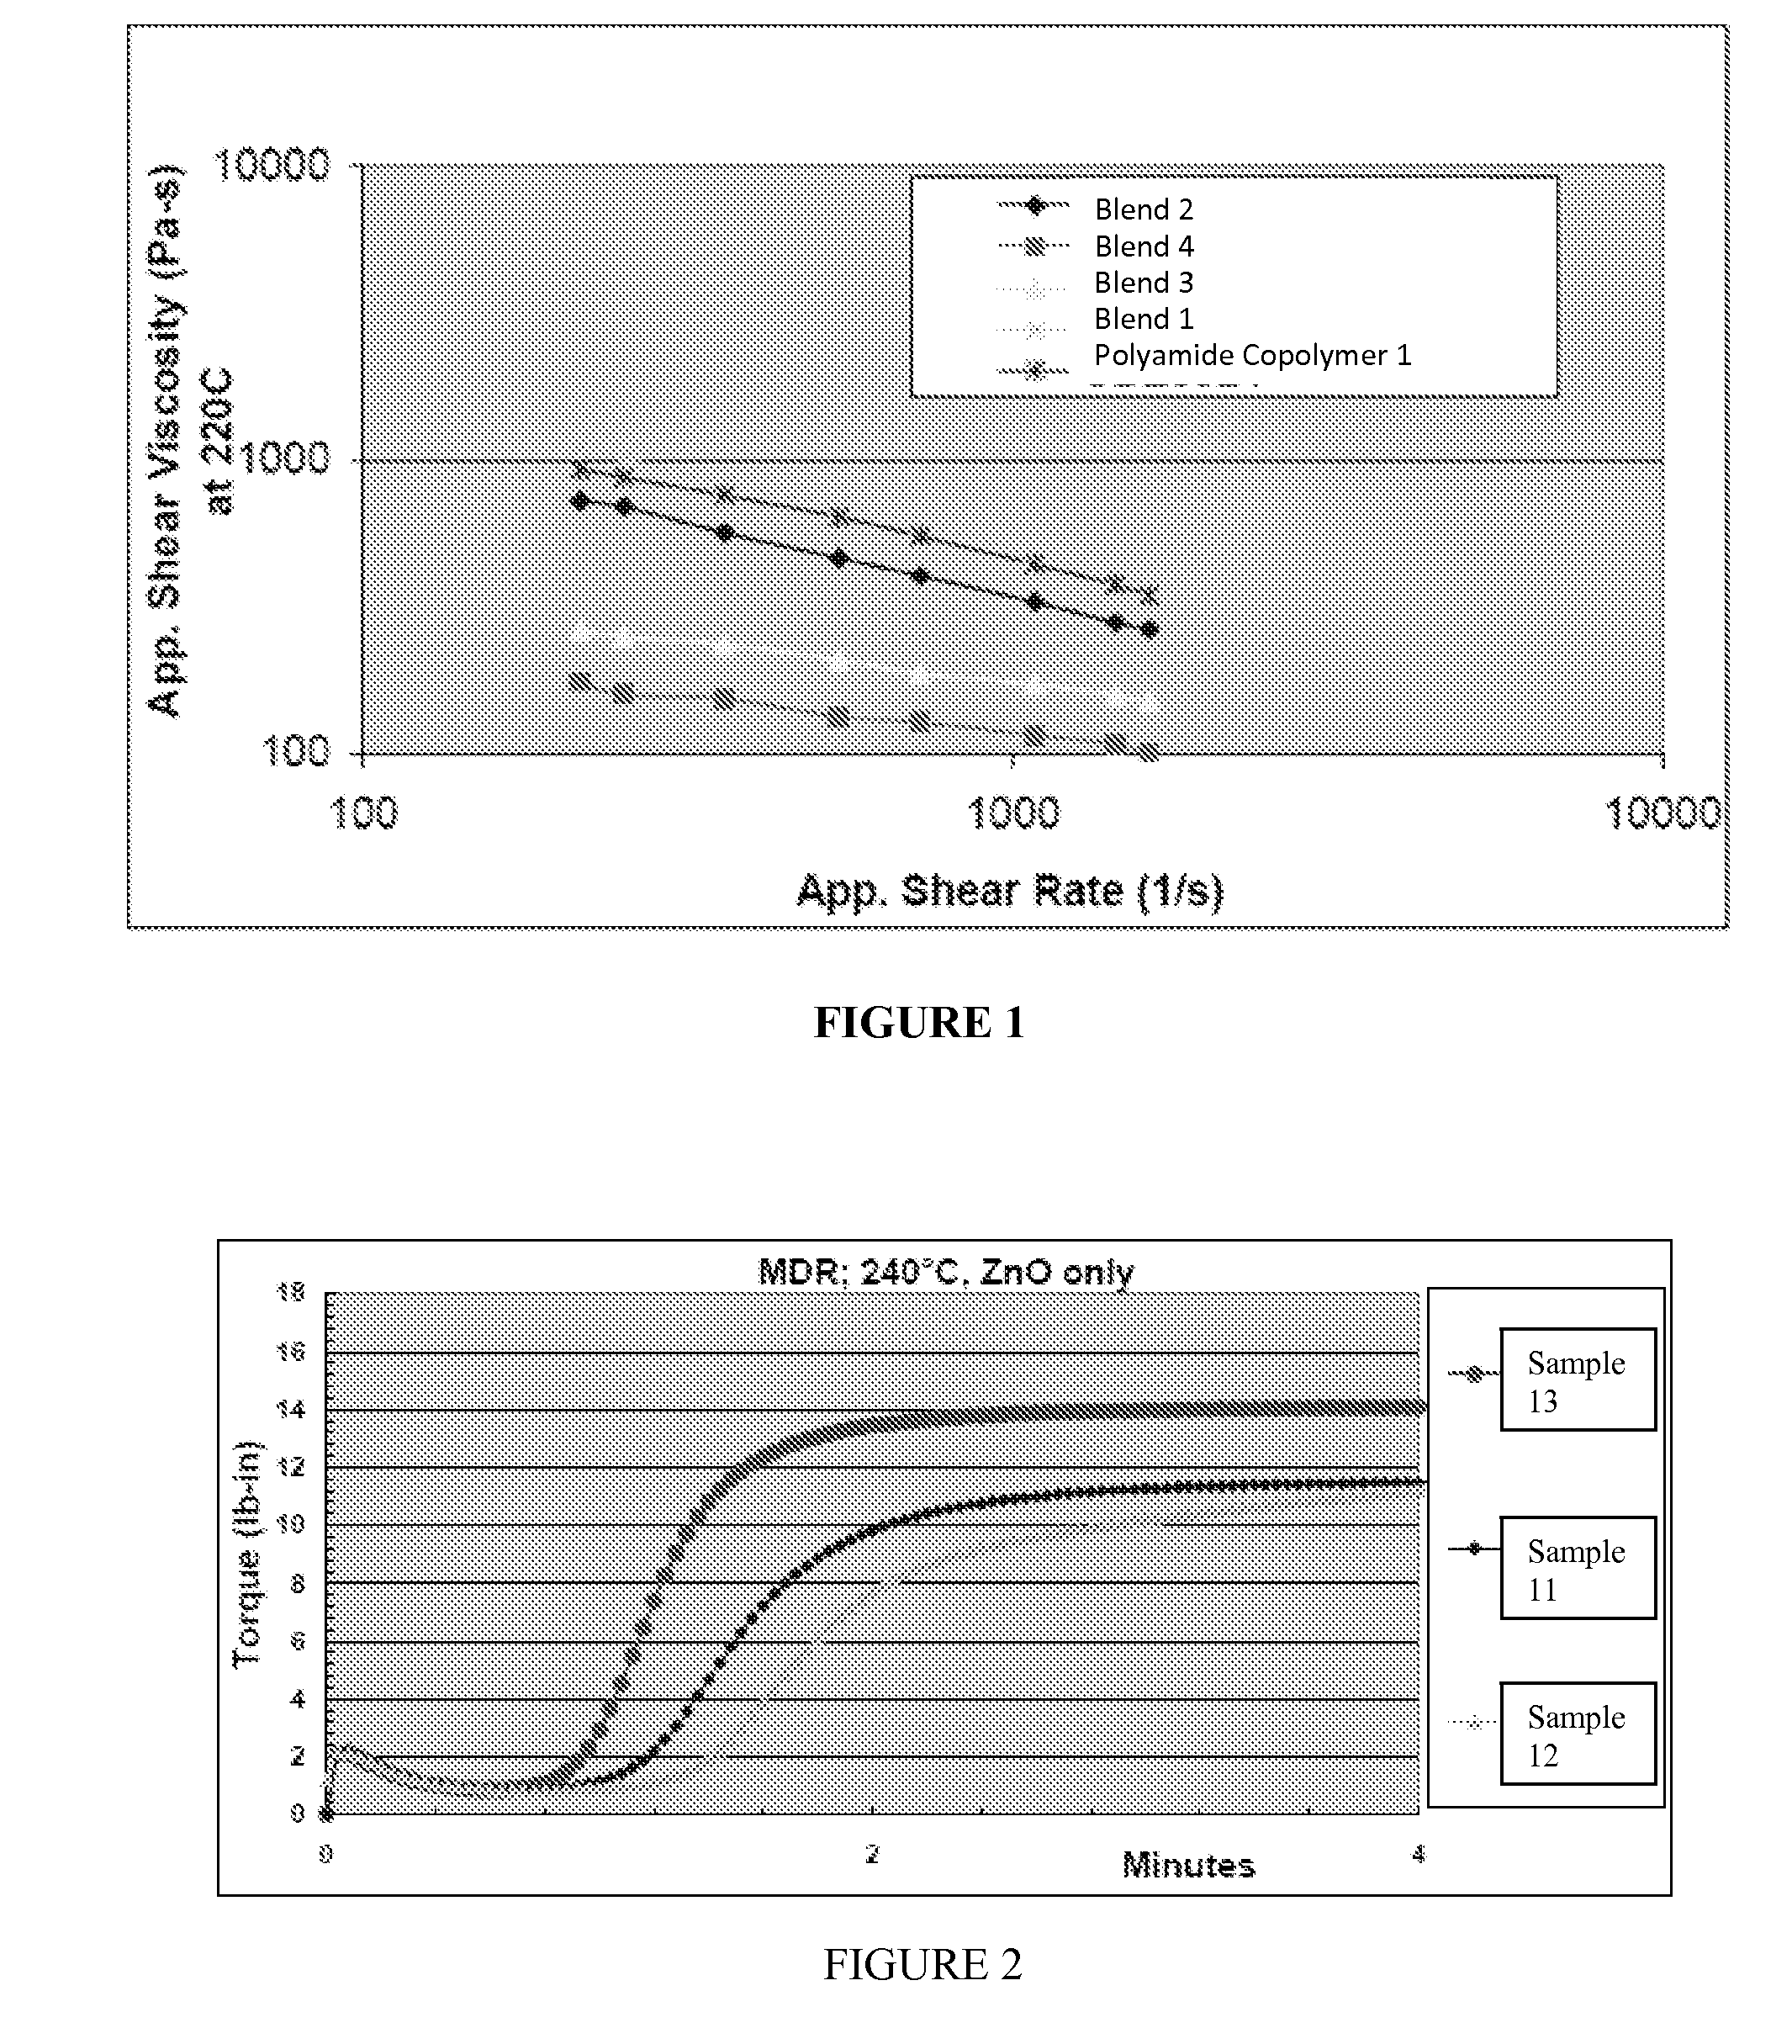 Elastomeric Compositions and Their Use in Articles